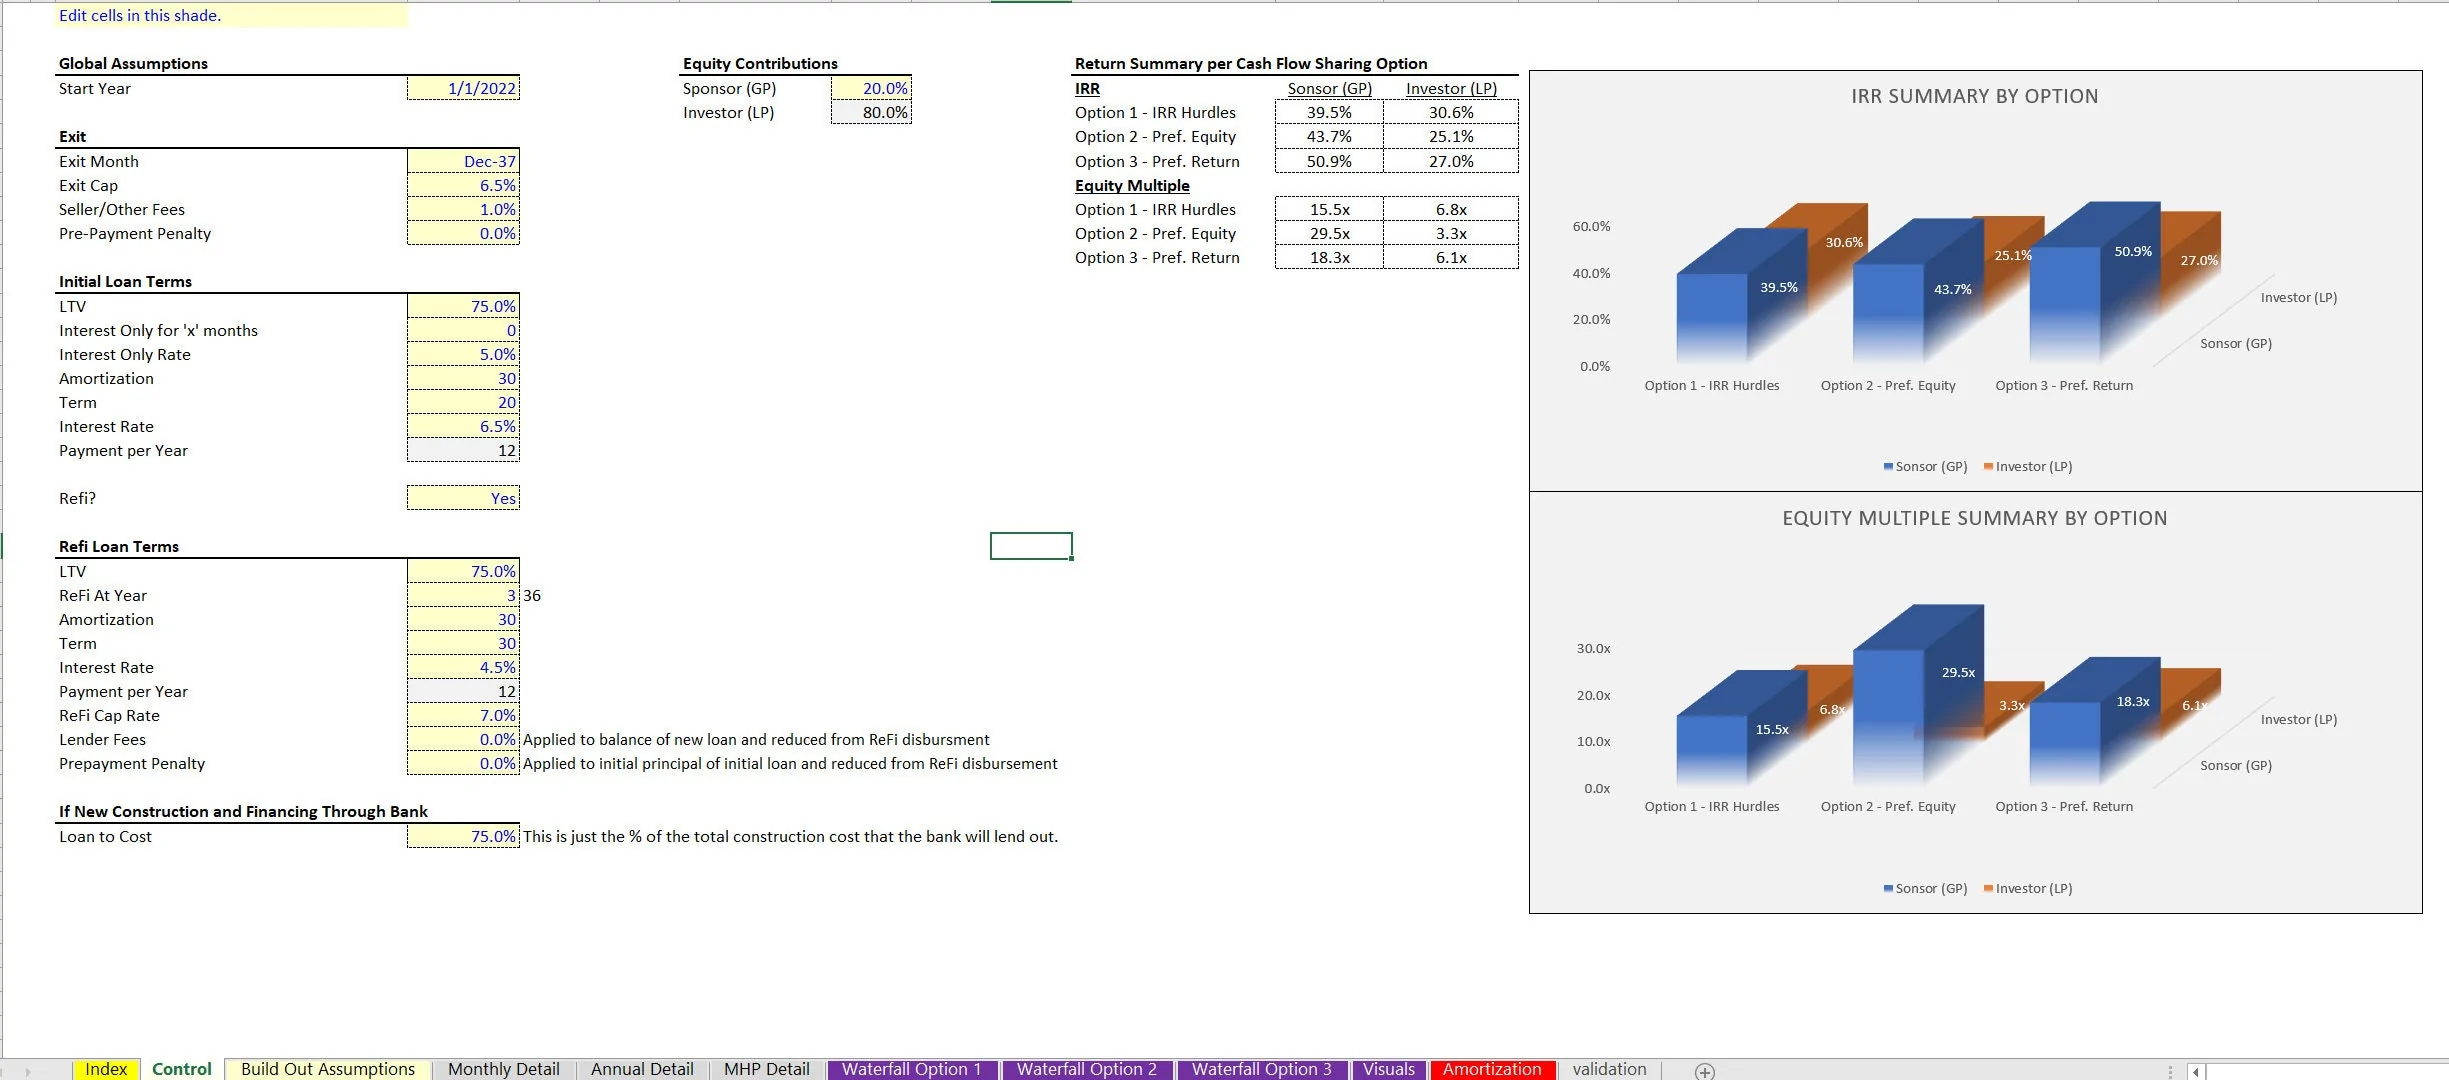 This is a partial preview of Mobile Home Park Acquisition Model: Up to 40 Parks (Excel workbook (XLSX)). 